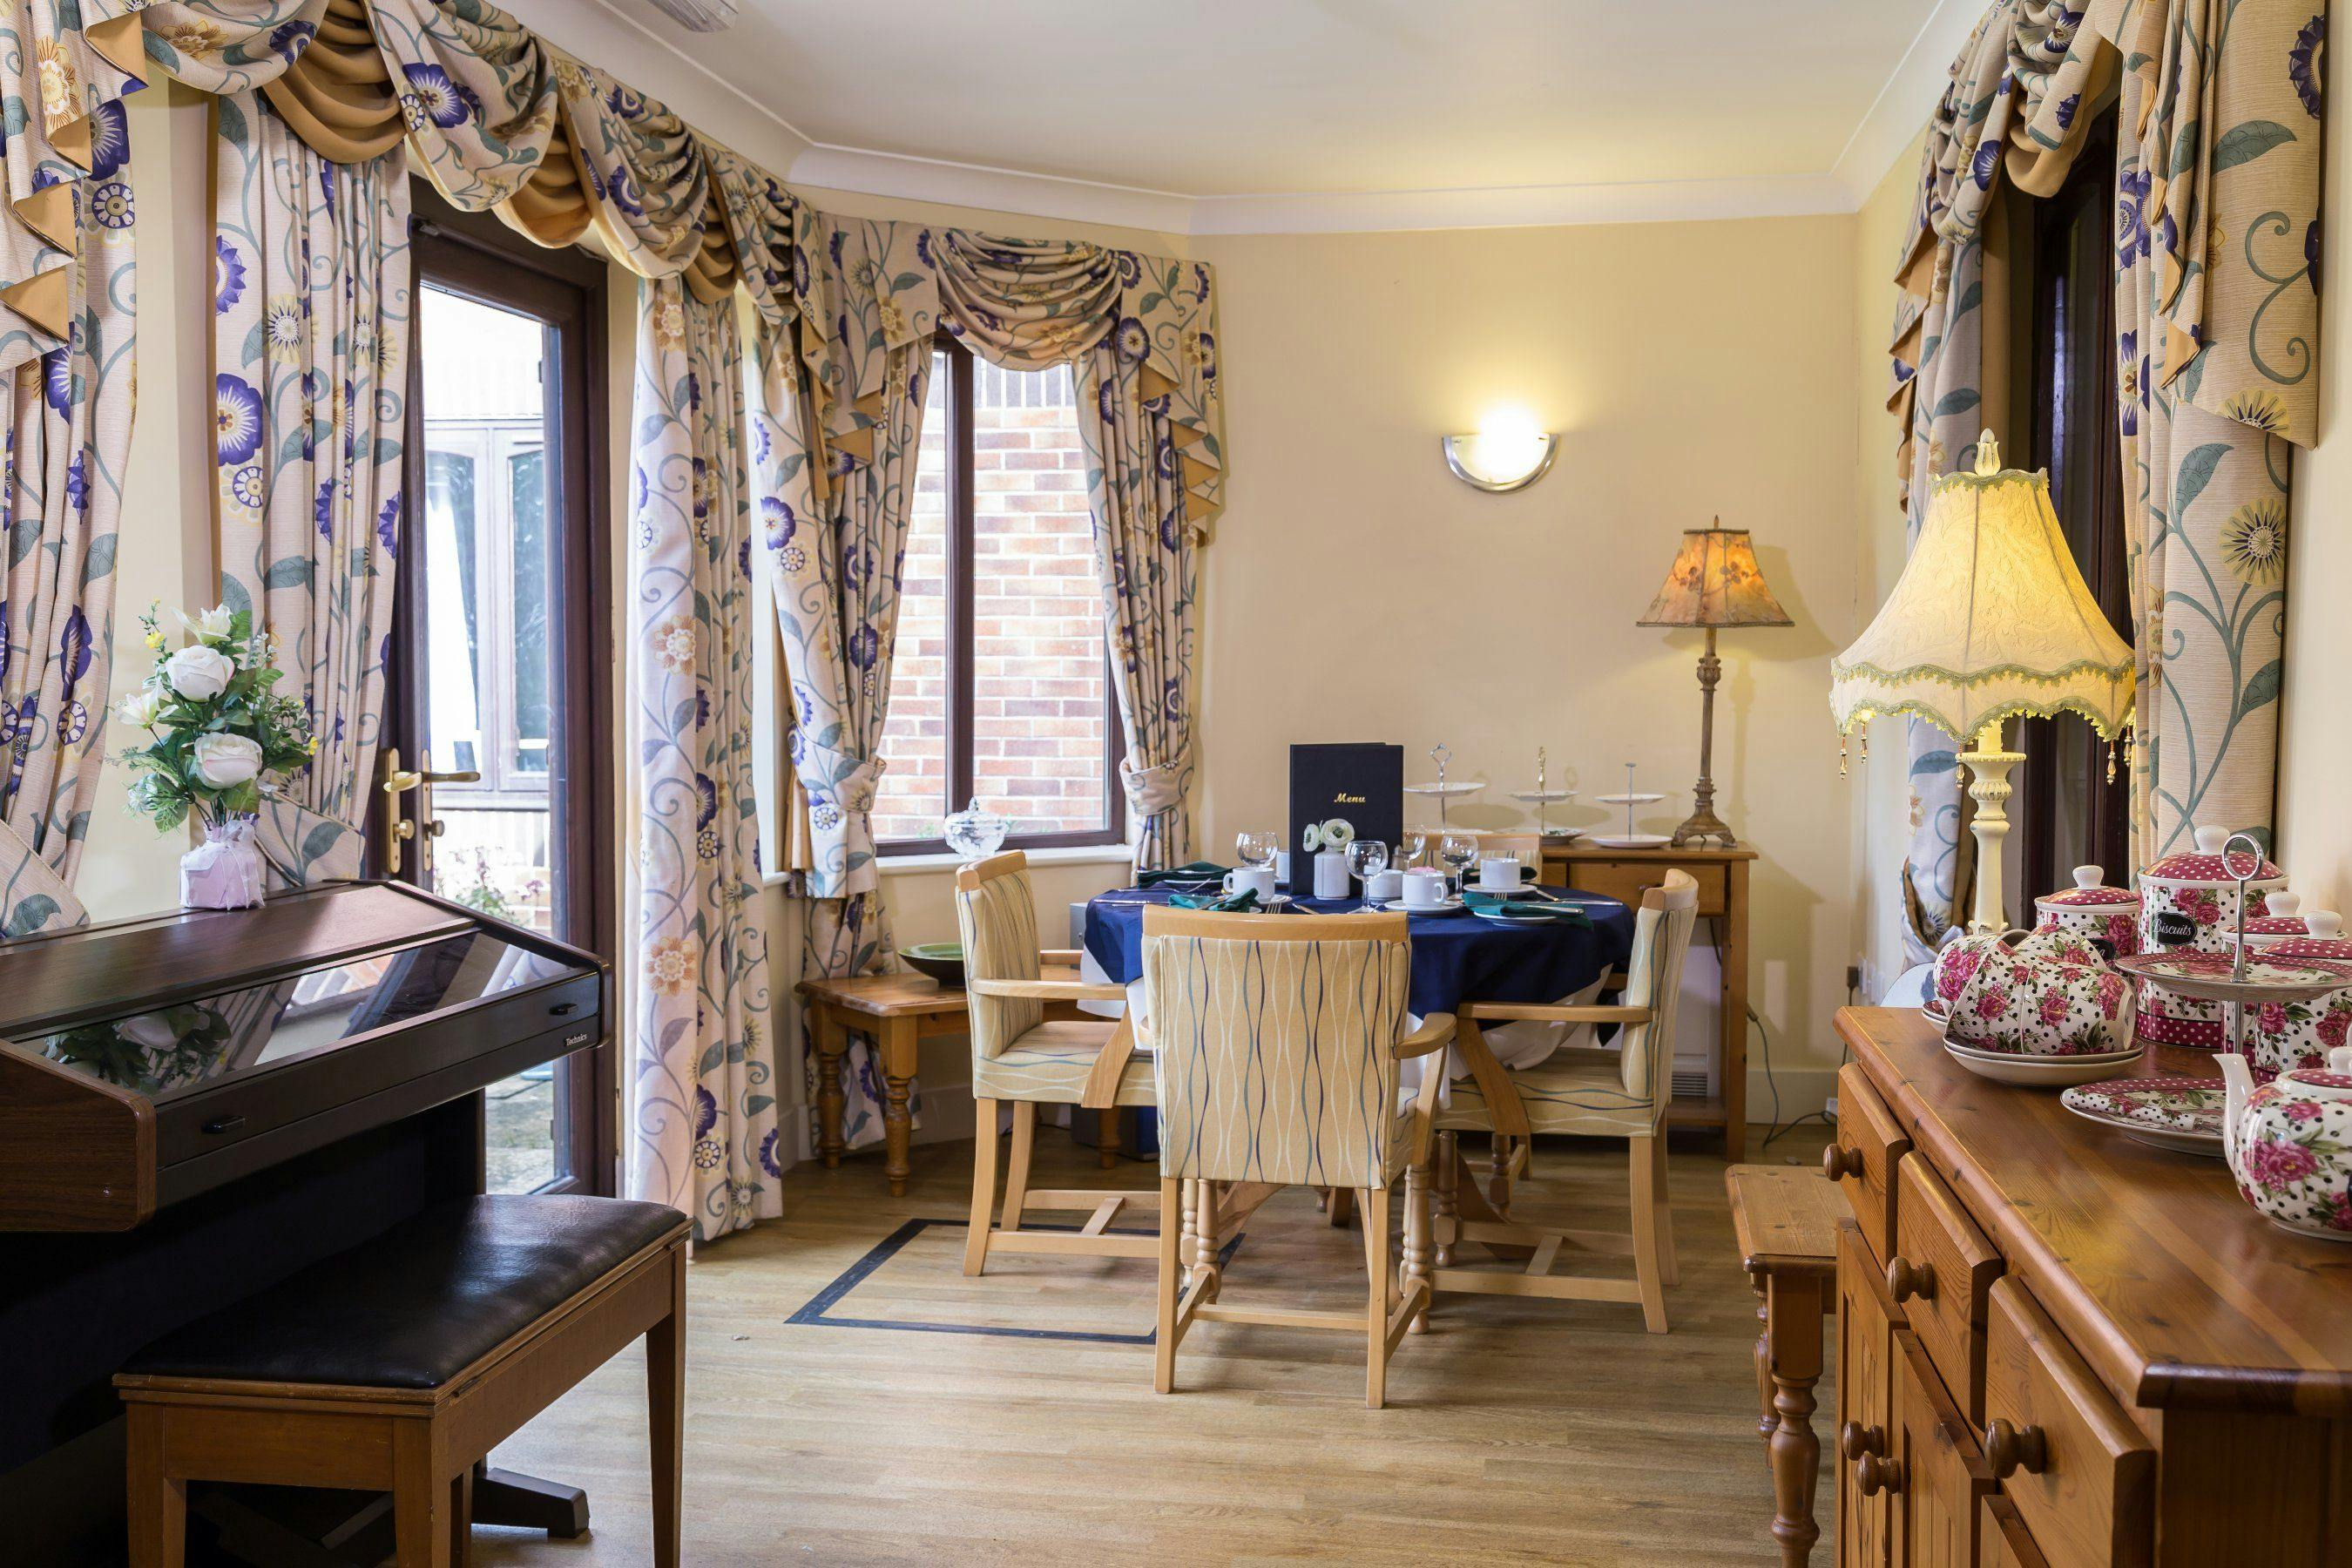 Dining Area at Mallard Court Care home in Bridlington, East Riding of Yorkshire